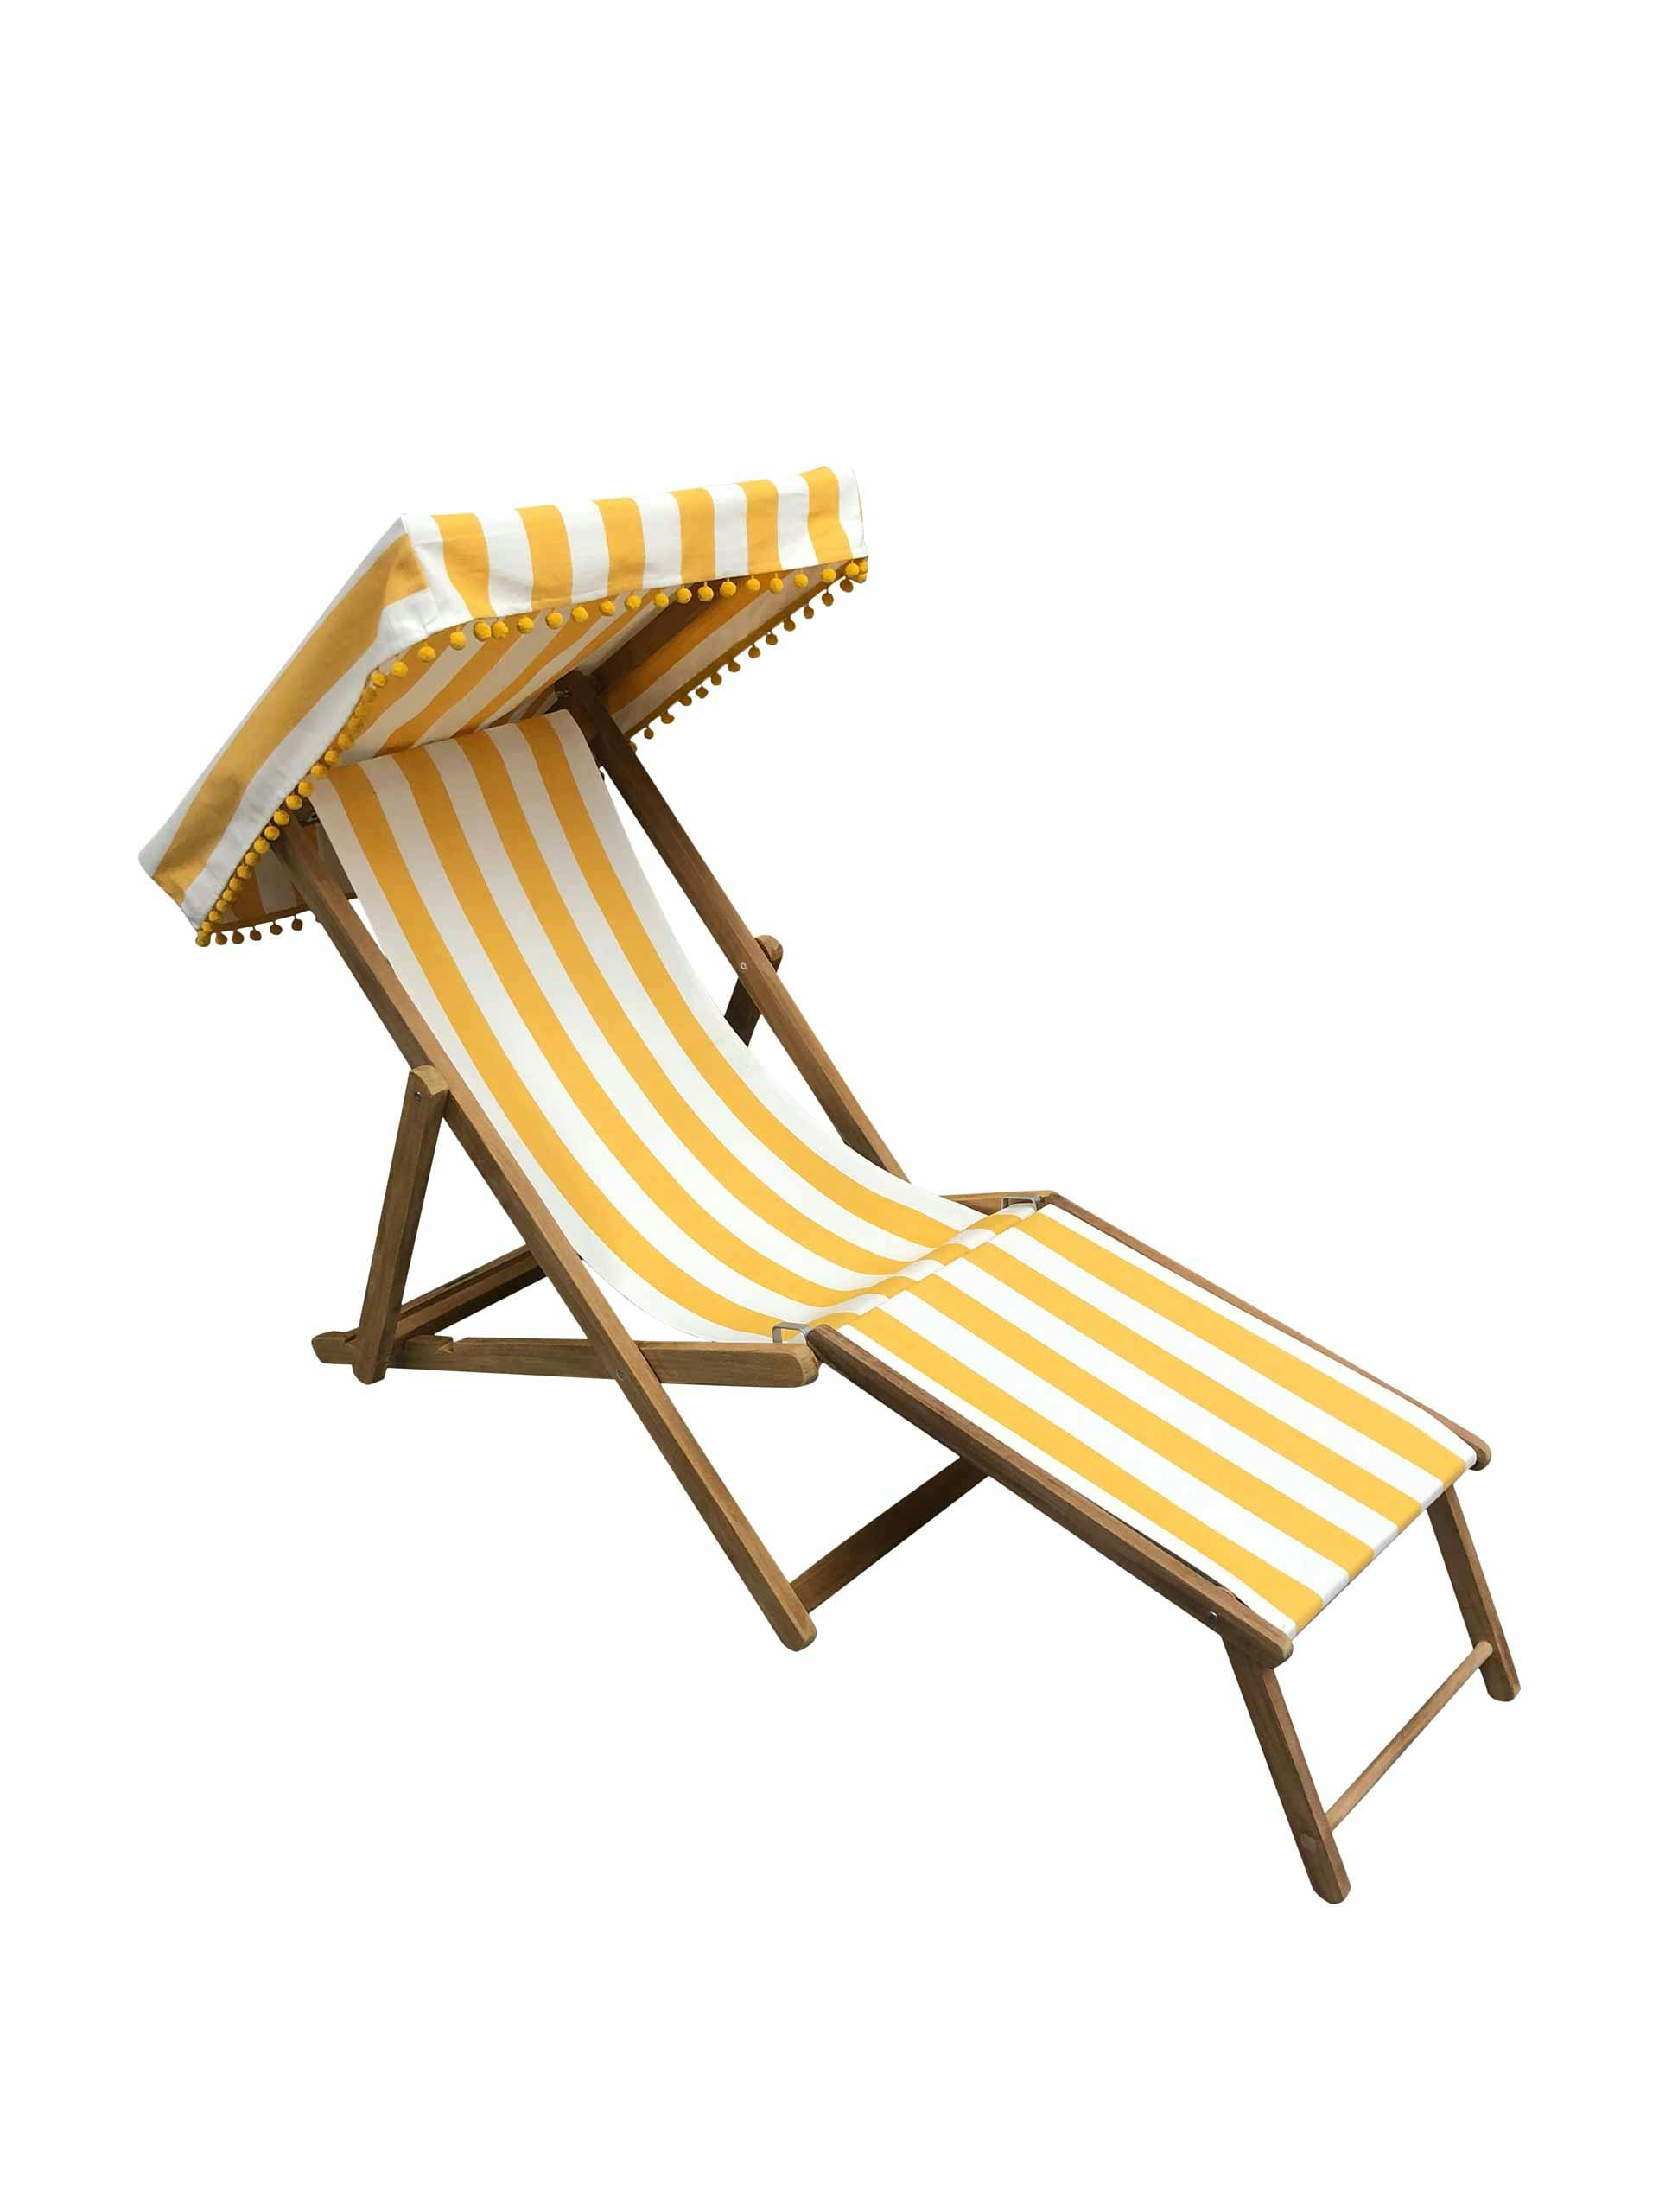 Edwardian deckchair with canopy and footstool